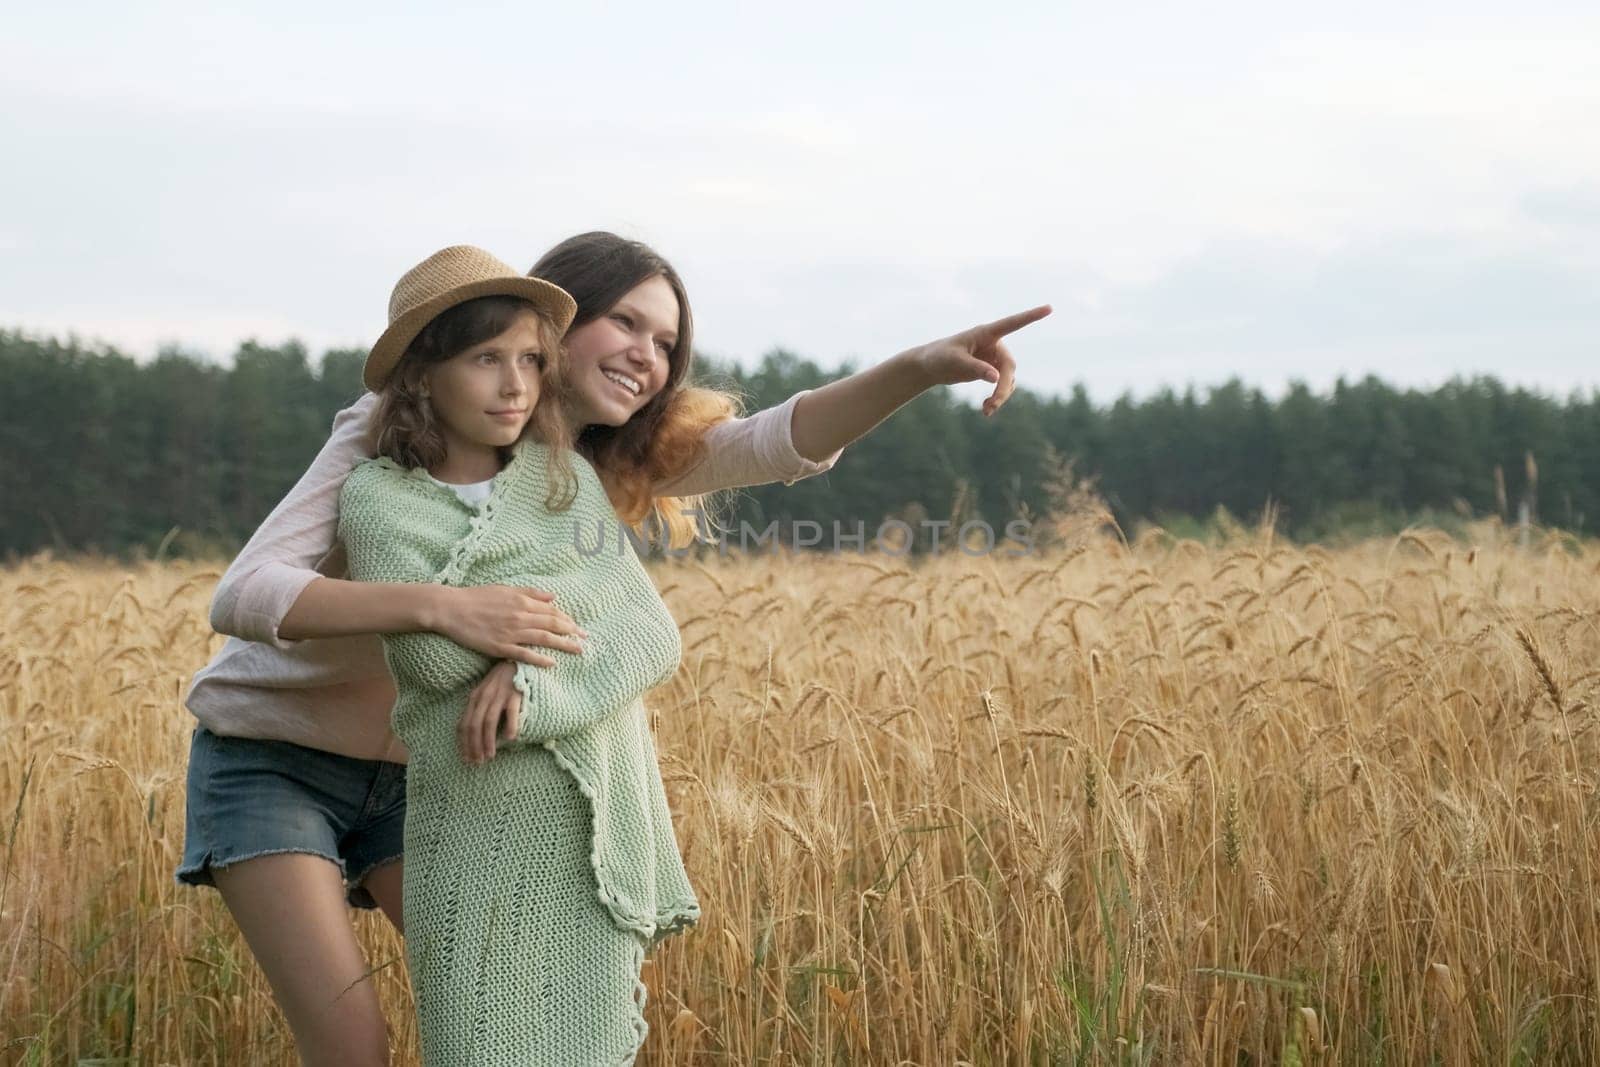 Elder sister hugged younger and shows a hand to the side, background field of yellow ripe wheat